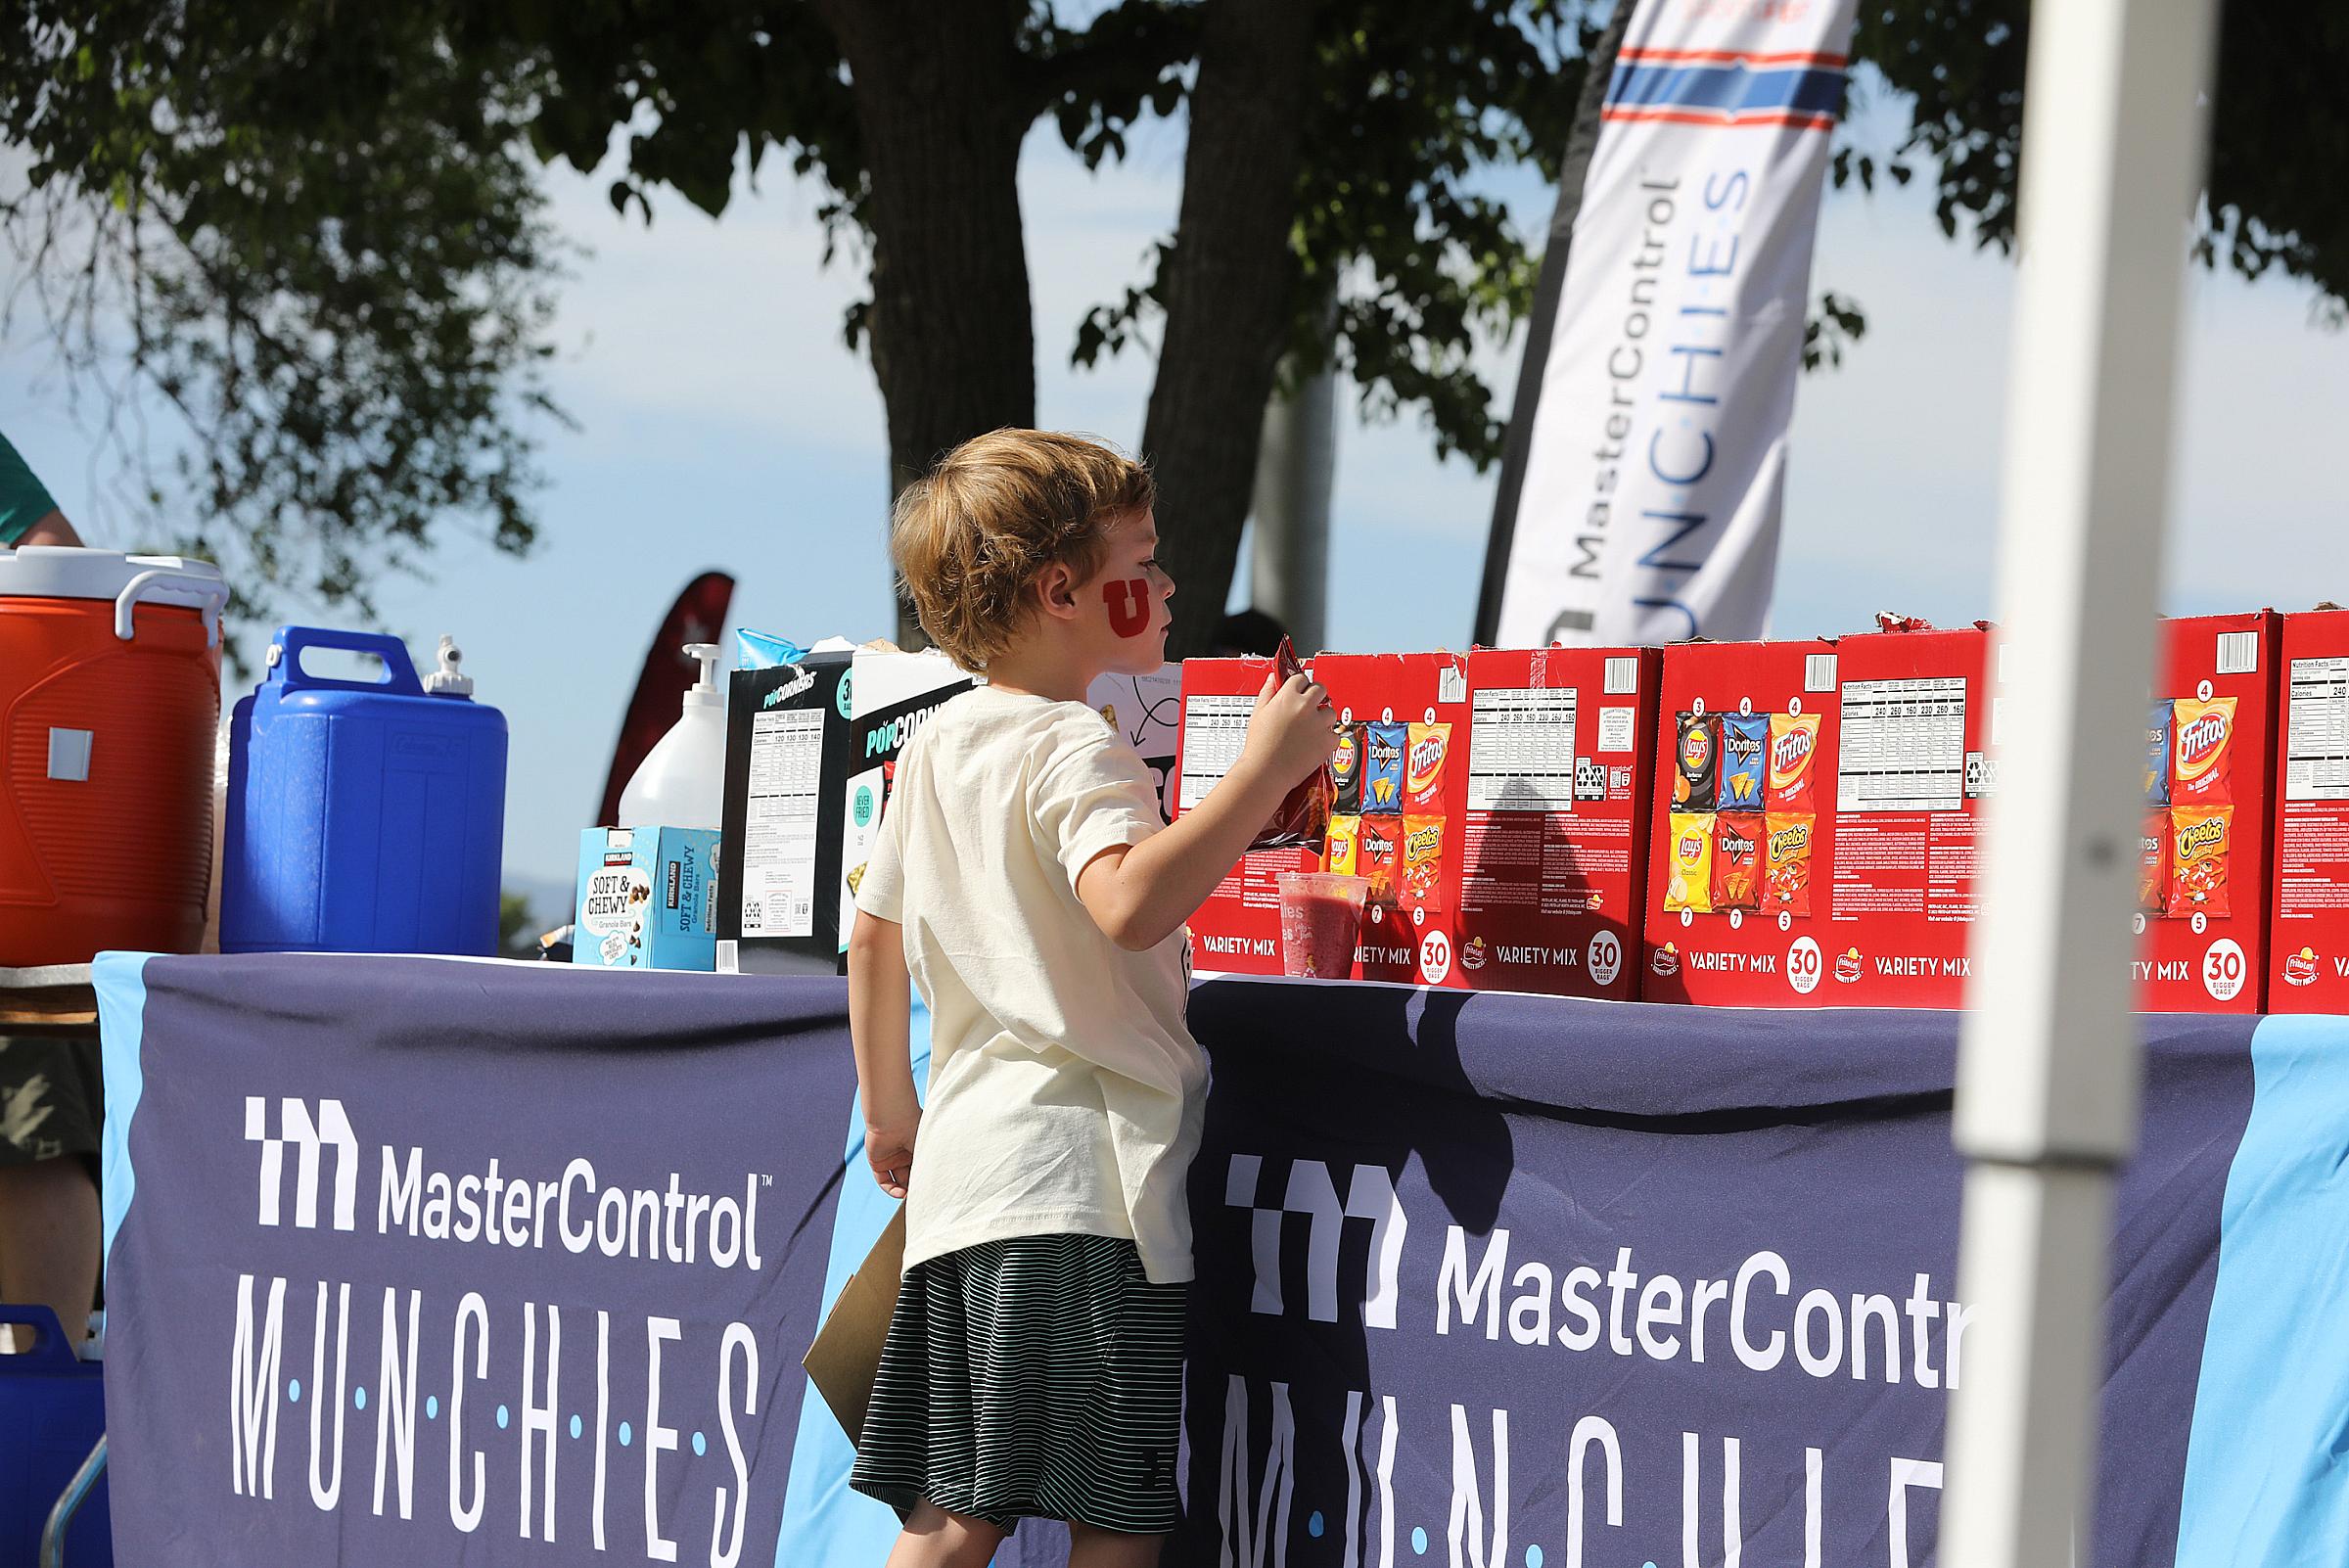 Kids Fun K participant getting snacks at MasterControl's "Munchies" table